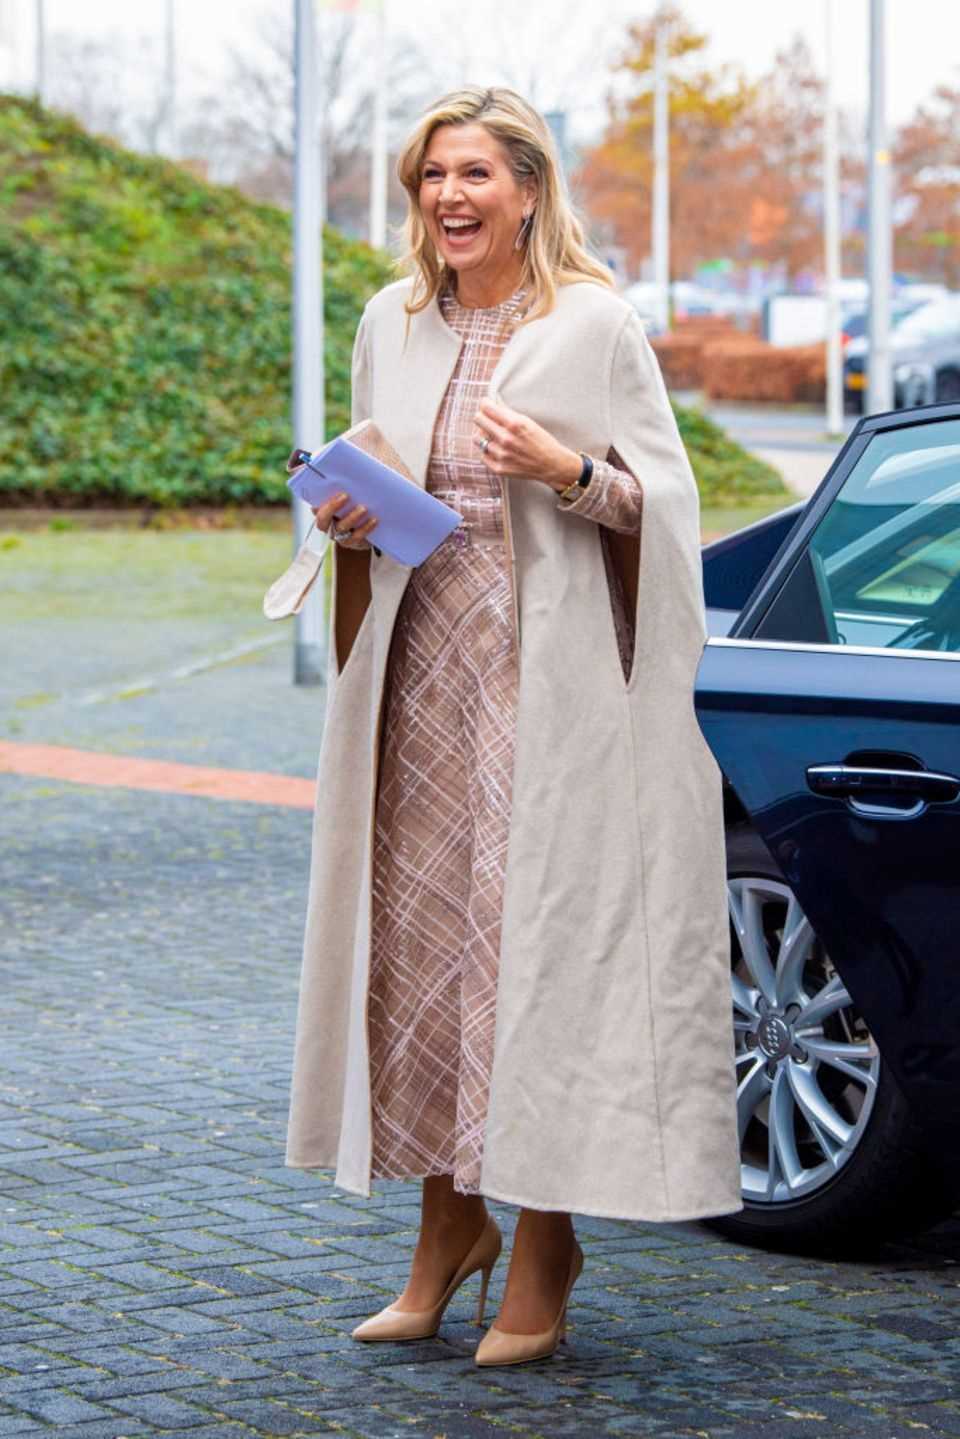 Queen Máxima is visibly happy and shines so beautifully that the folds on her cape are hardly noticeable.